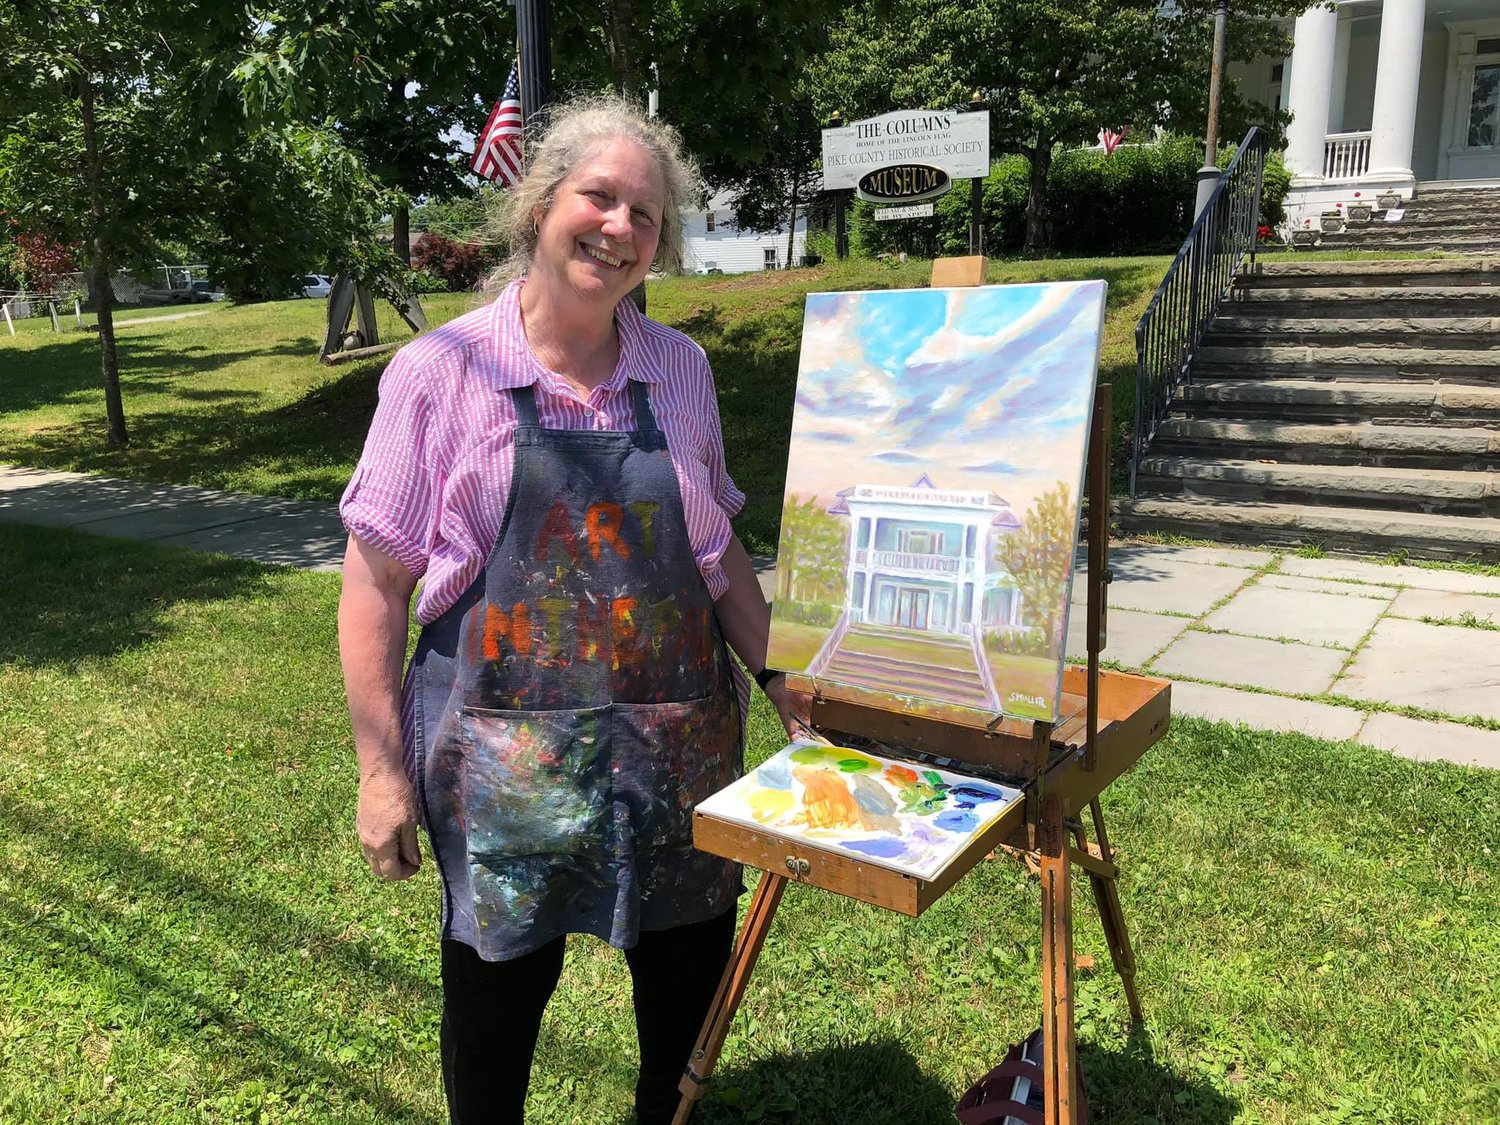 Artist Susan Miiller and her 2019 painting of the Columns museum.